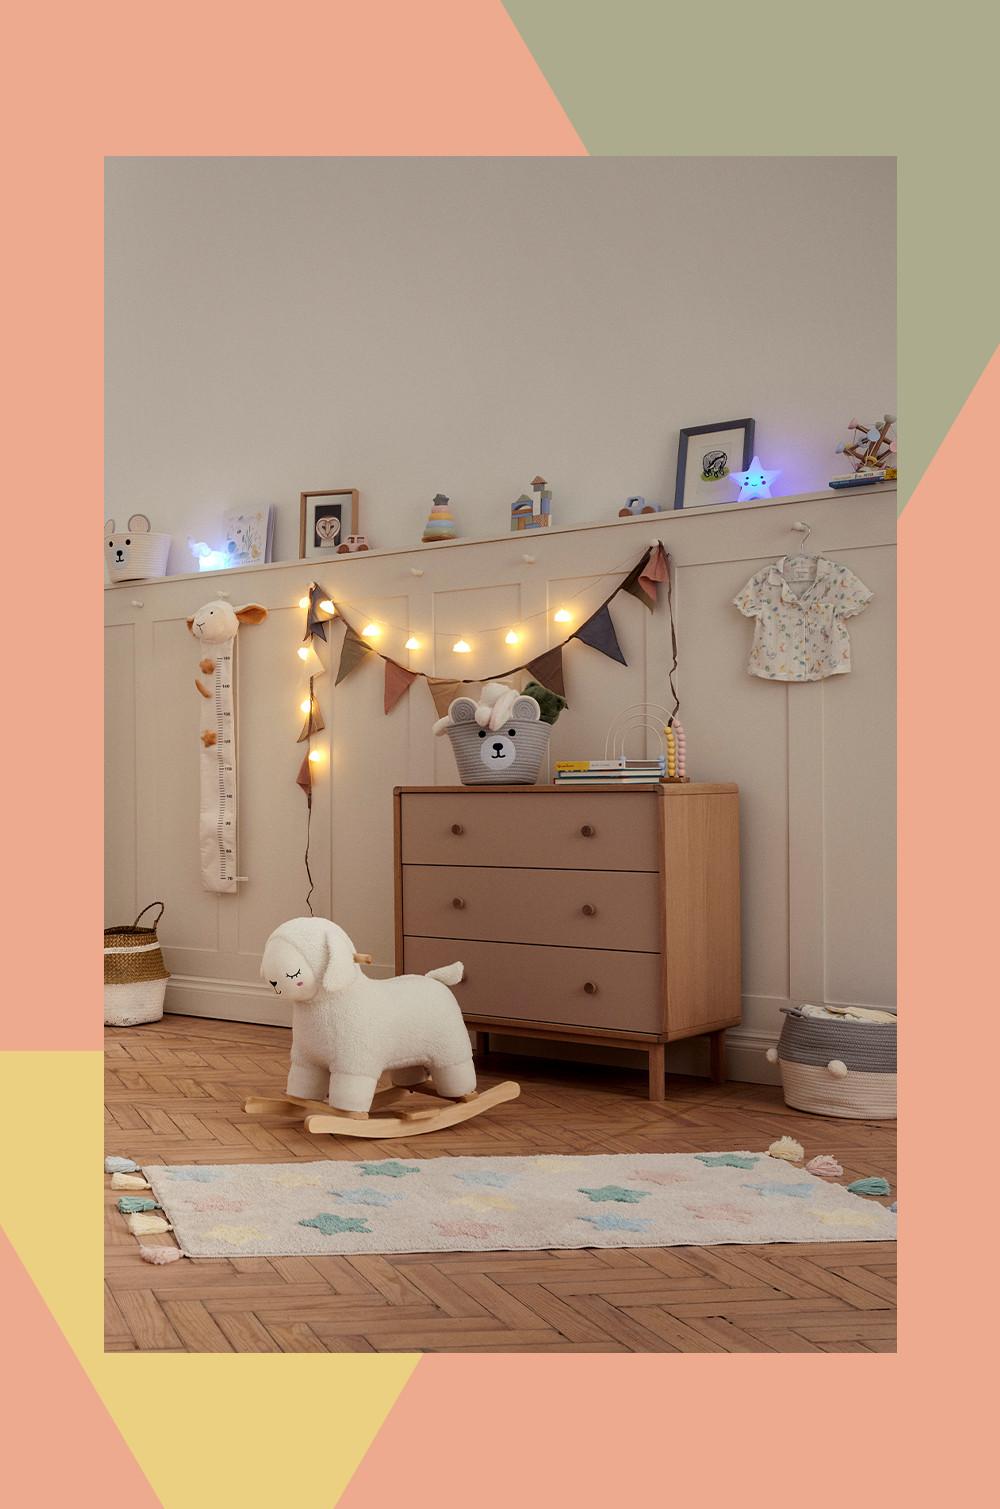 Nursery set up at night, showing shelfie with fairylights, rugs, soft toys and storage baskets